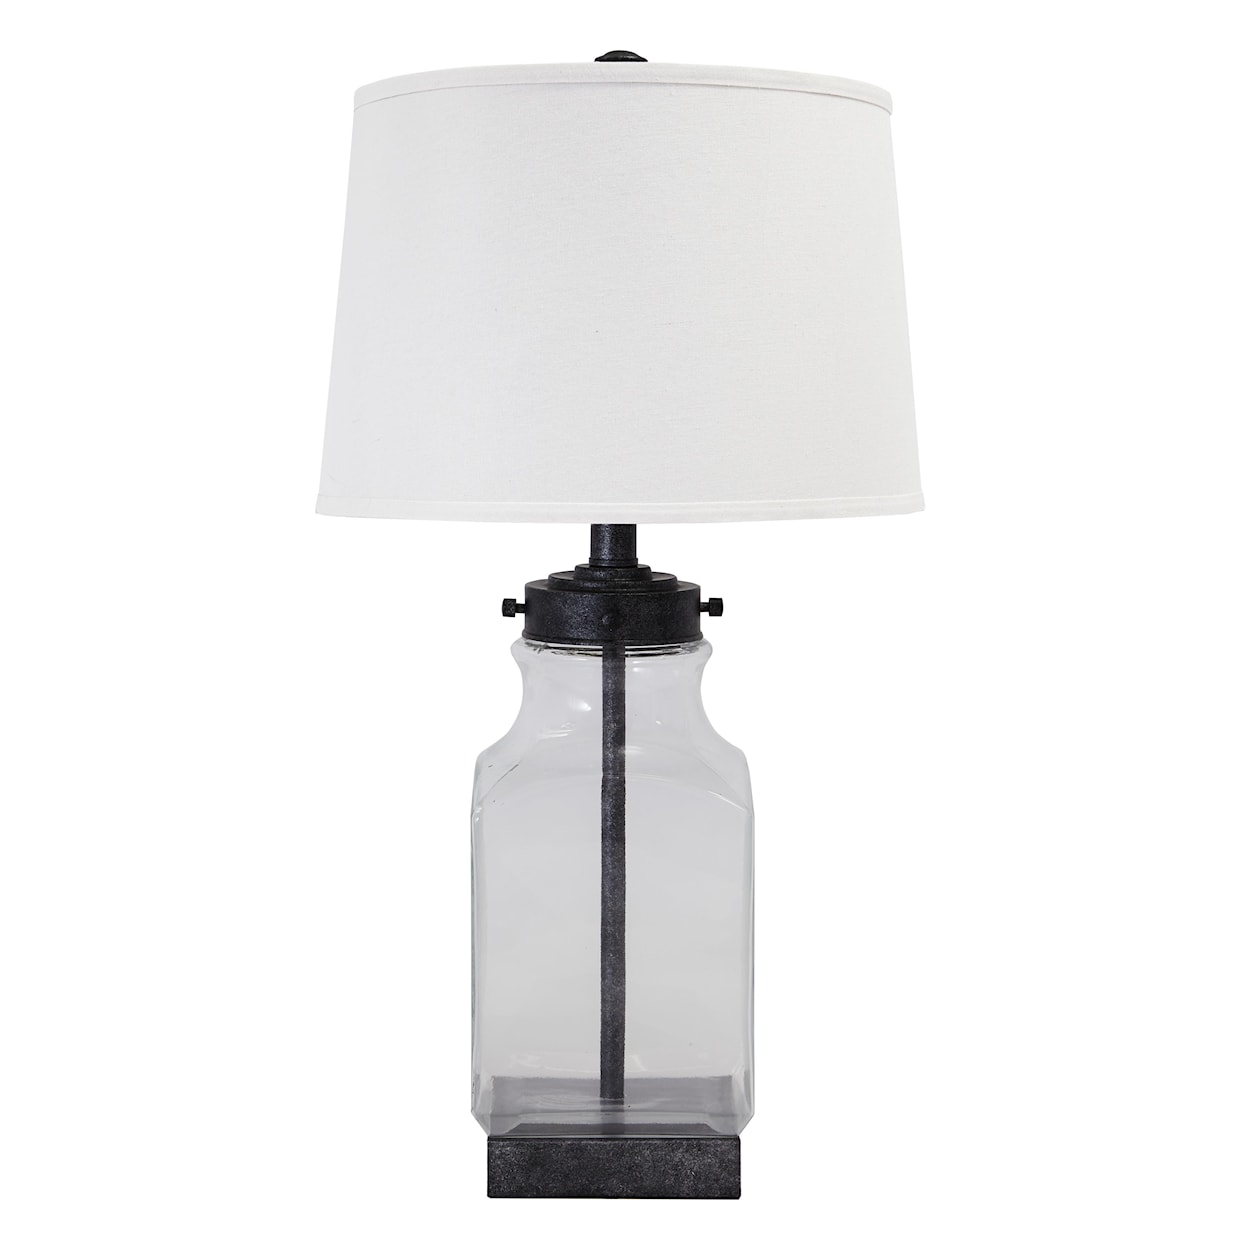 Signature Design by Ashley Lamps - Vintage Style Glass Table Lamp 